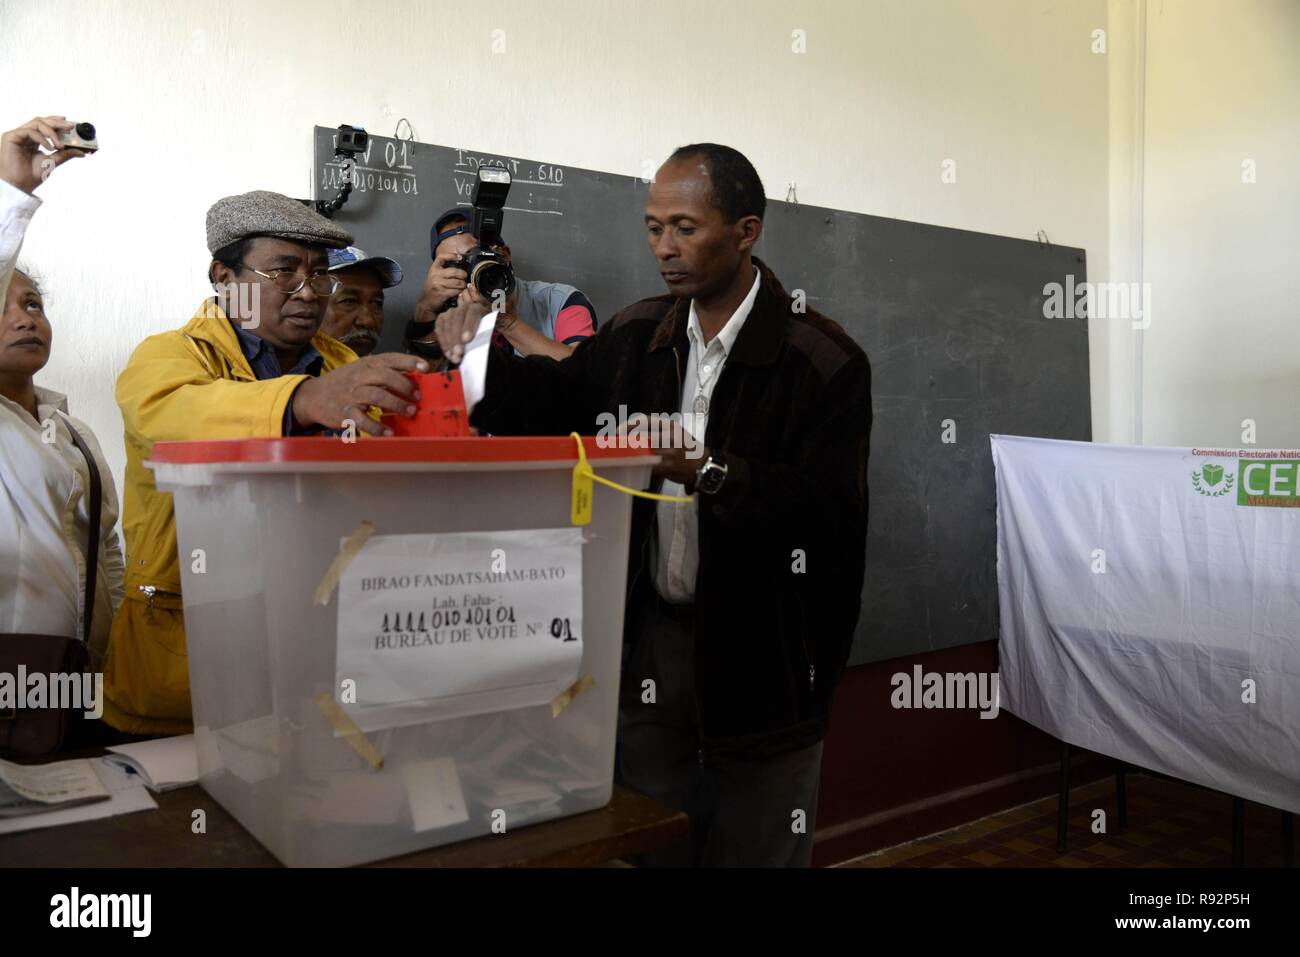 Antananarivo, Madagascar. 19th Dec, 2018. A voter casts his ballot at a polling station in Antananarivo, Madagascar, Dec. 19, 2018. Voters went to the polls in Madagascar's second round presidential election on Wednesday to select a new president from two competing former presidents. Credit: Sitraka/Xinhua/Alamy Live News Stock Photo